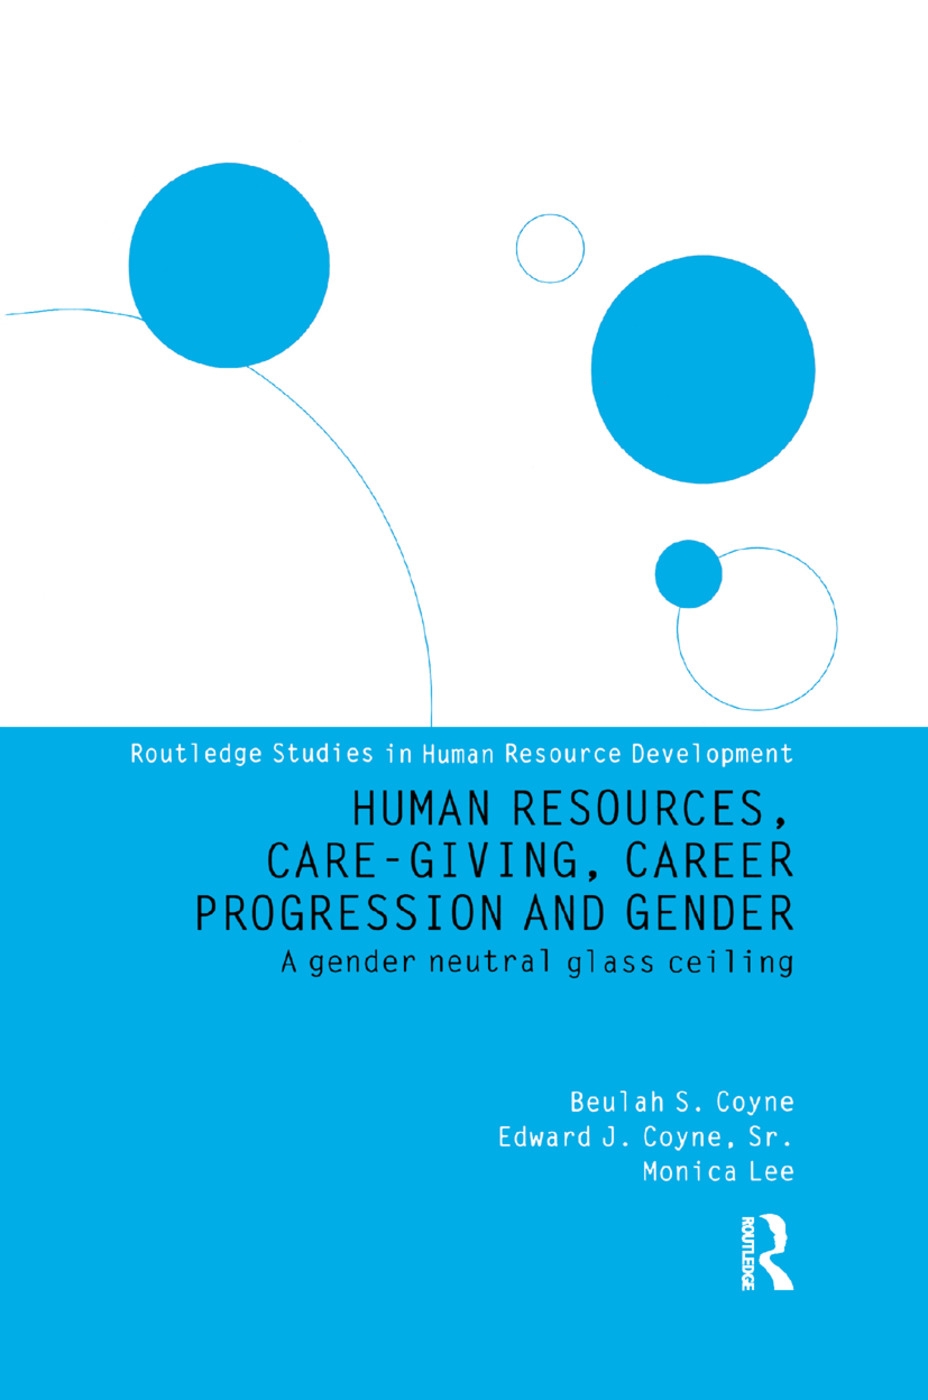 Human Resources, Care Giving, Career Progression and Gender: A Gender Neutral Glass Ceiling